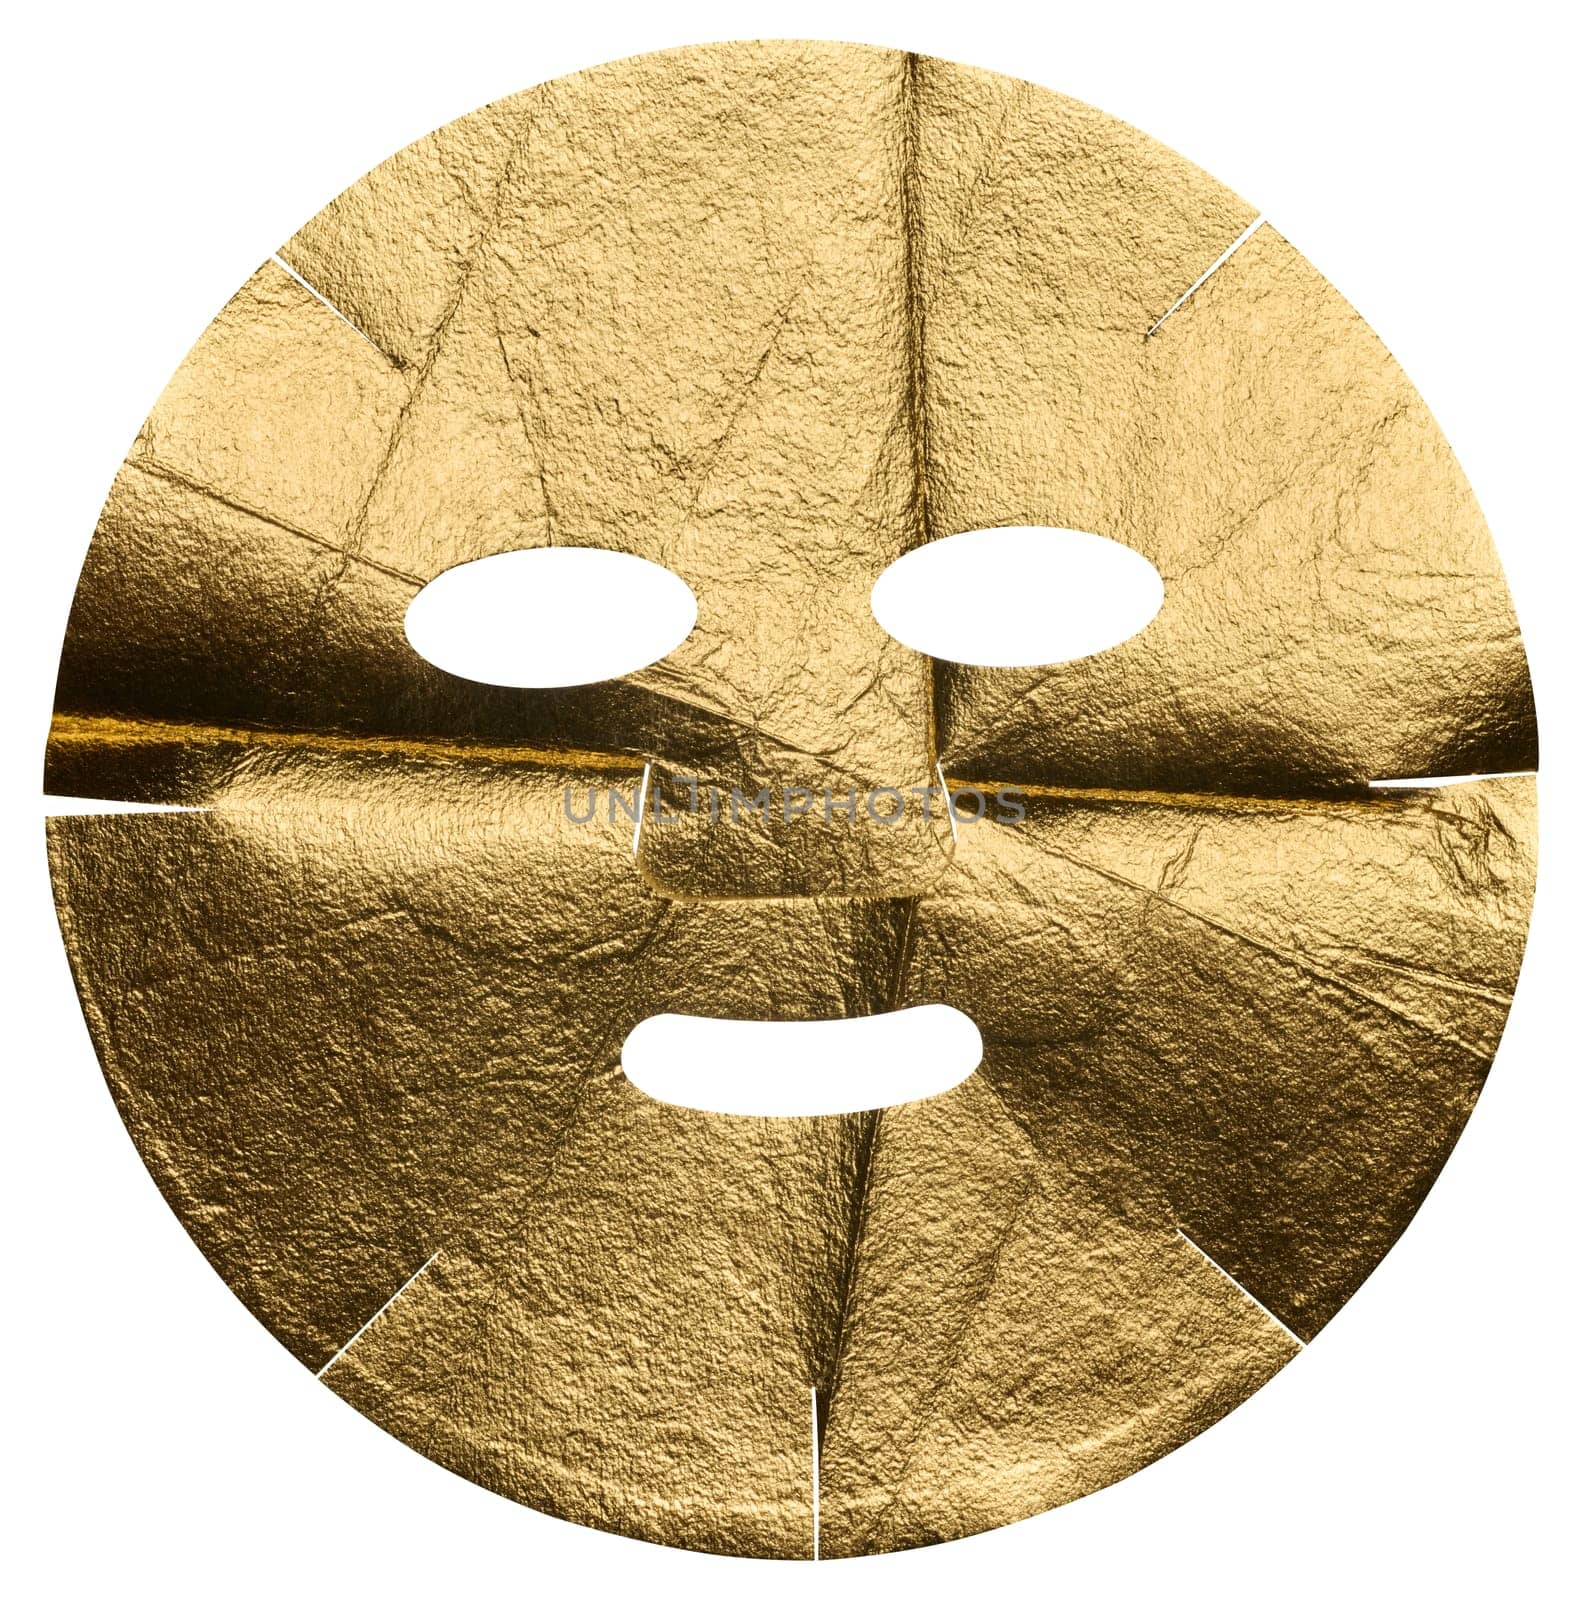 Fabric golden cosmetic face mask with cut holes on isolated background by ndanko